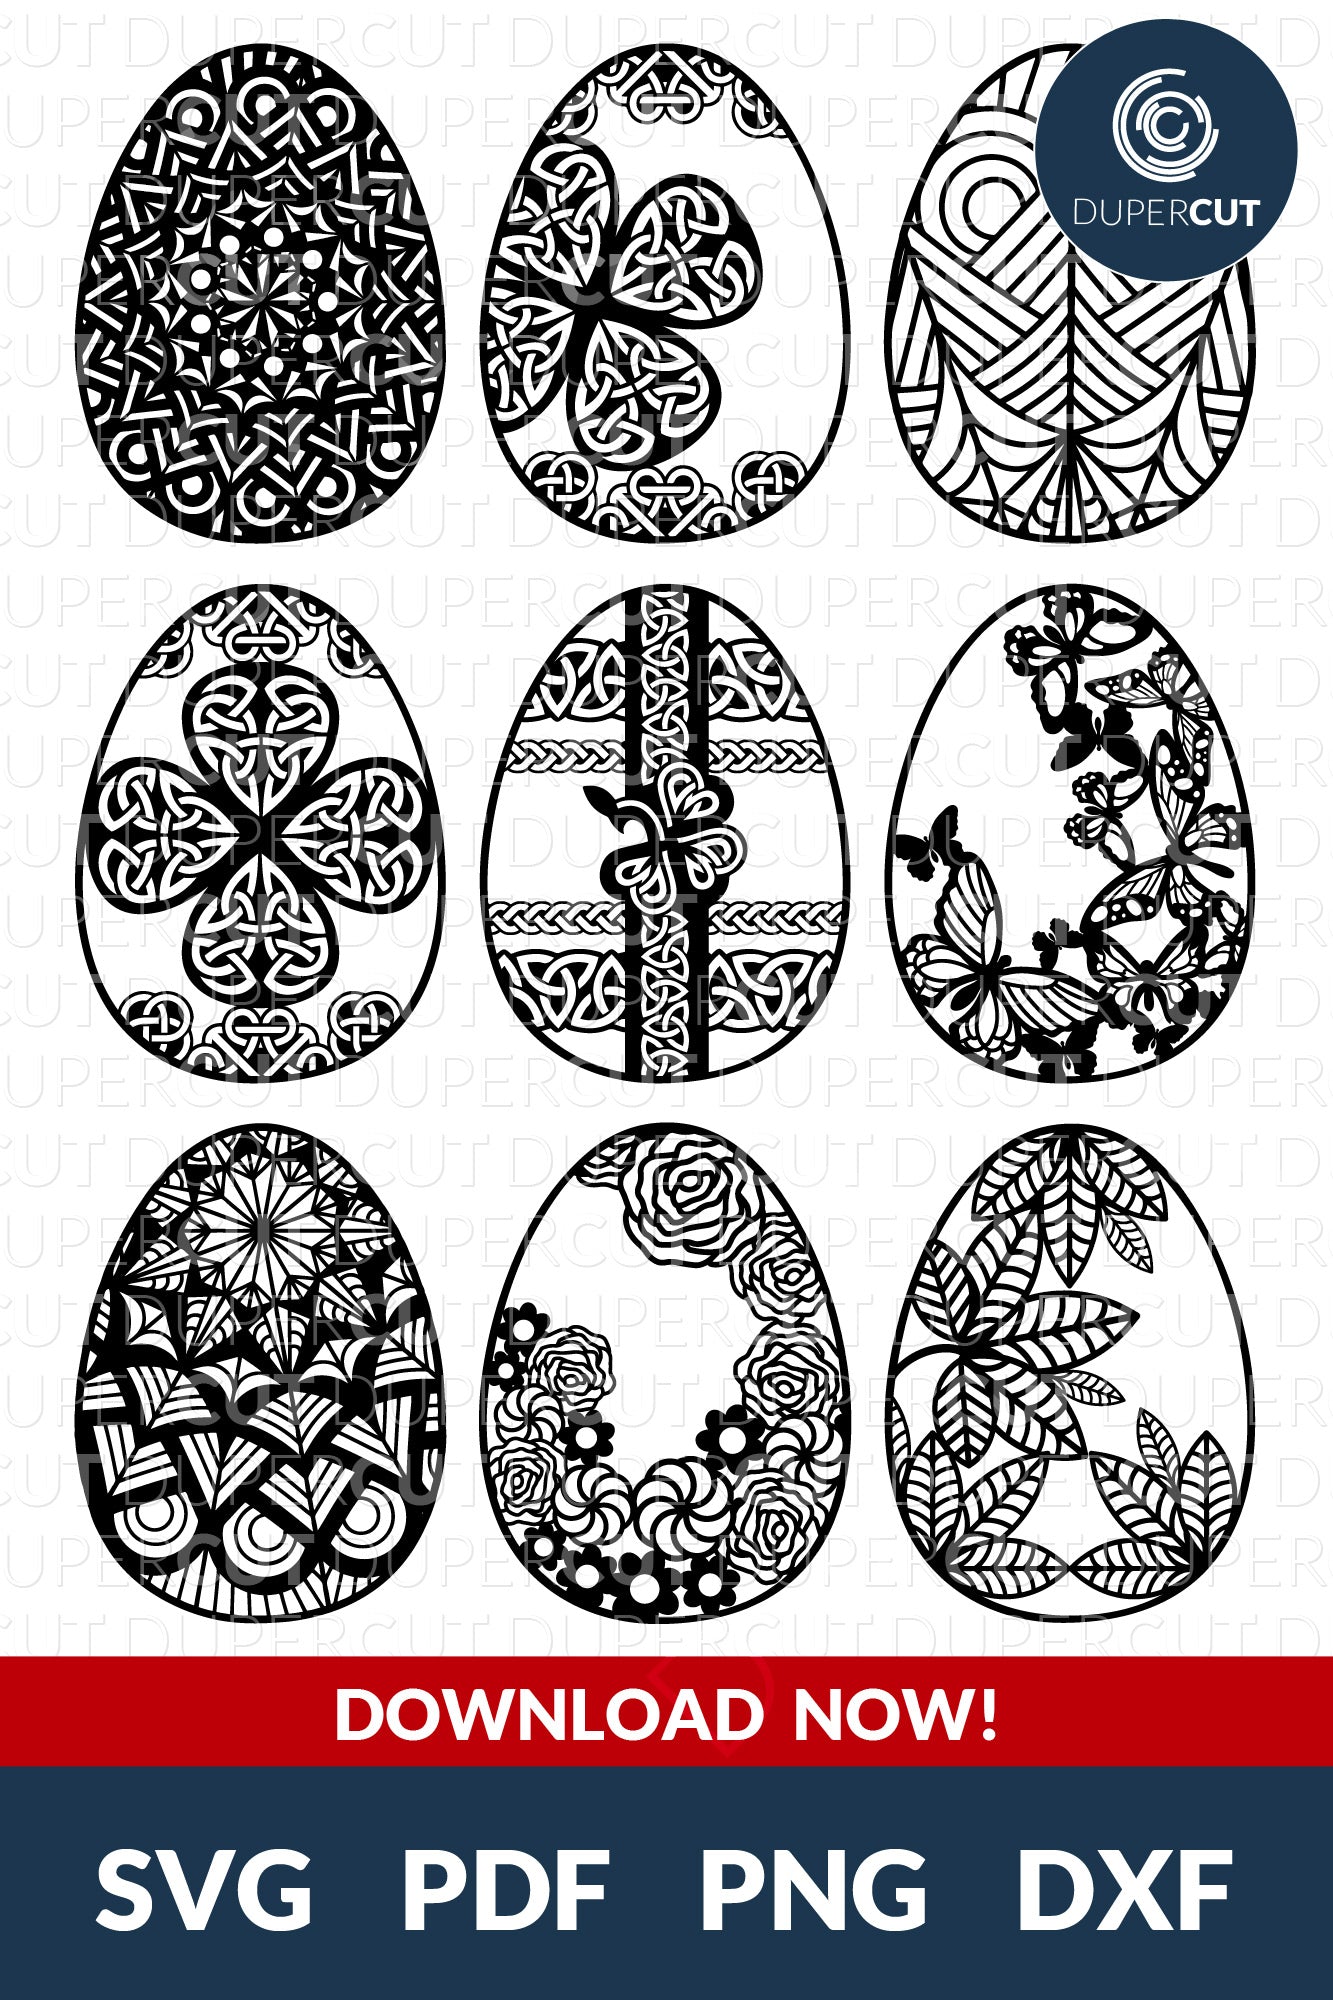 Easter eggs with butterflies, flowers, celtic knots  - SVG DXF PNG vector files for laser and CNC machines, Cricut, Silhouette Cameo, Glowforge projects. 